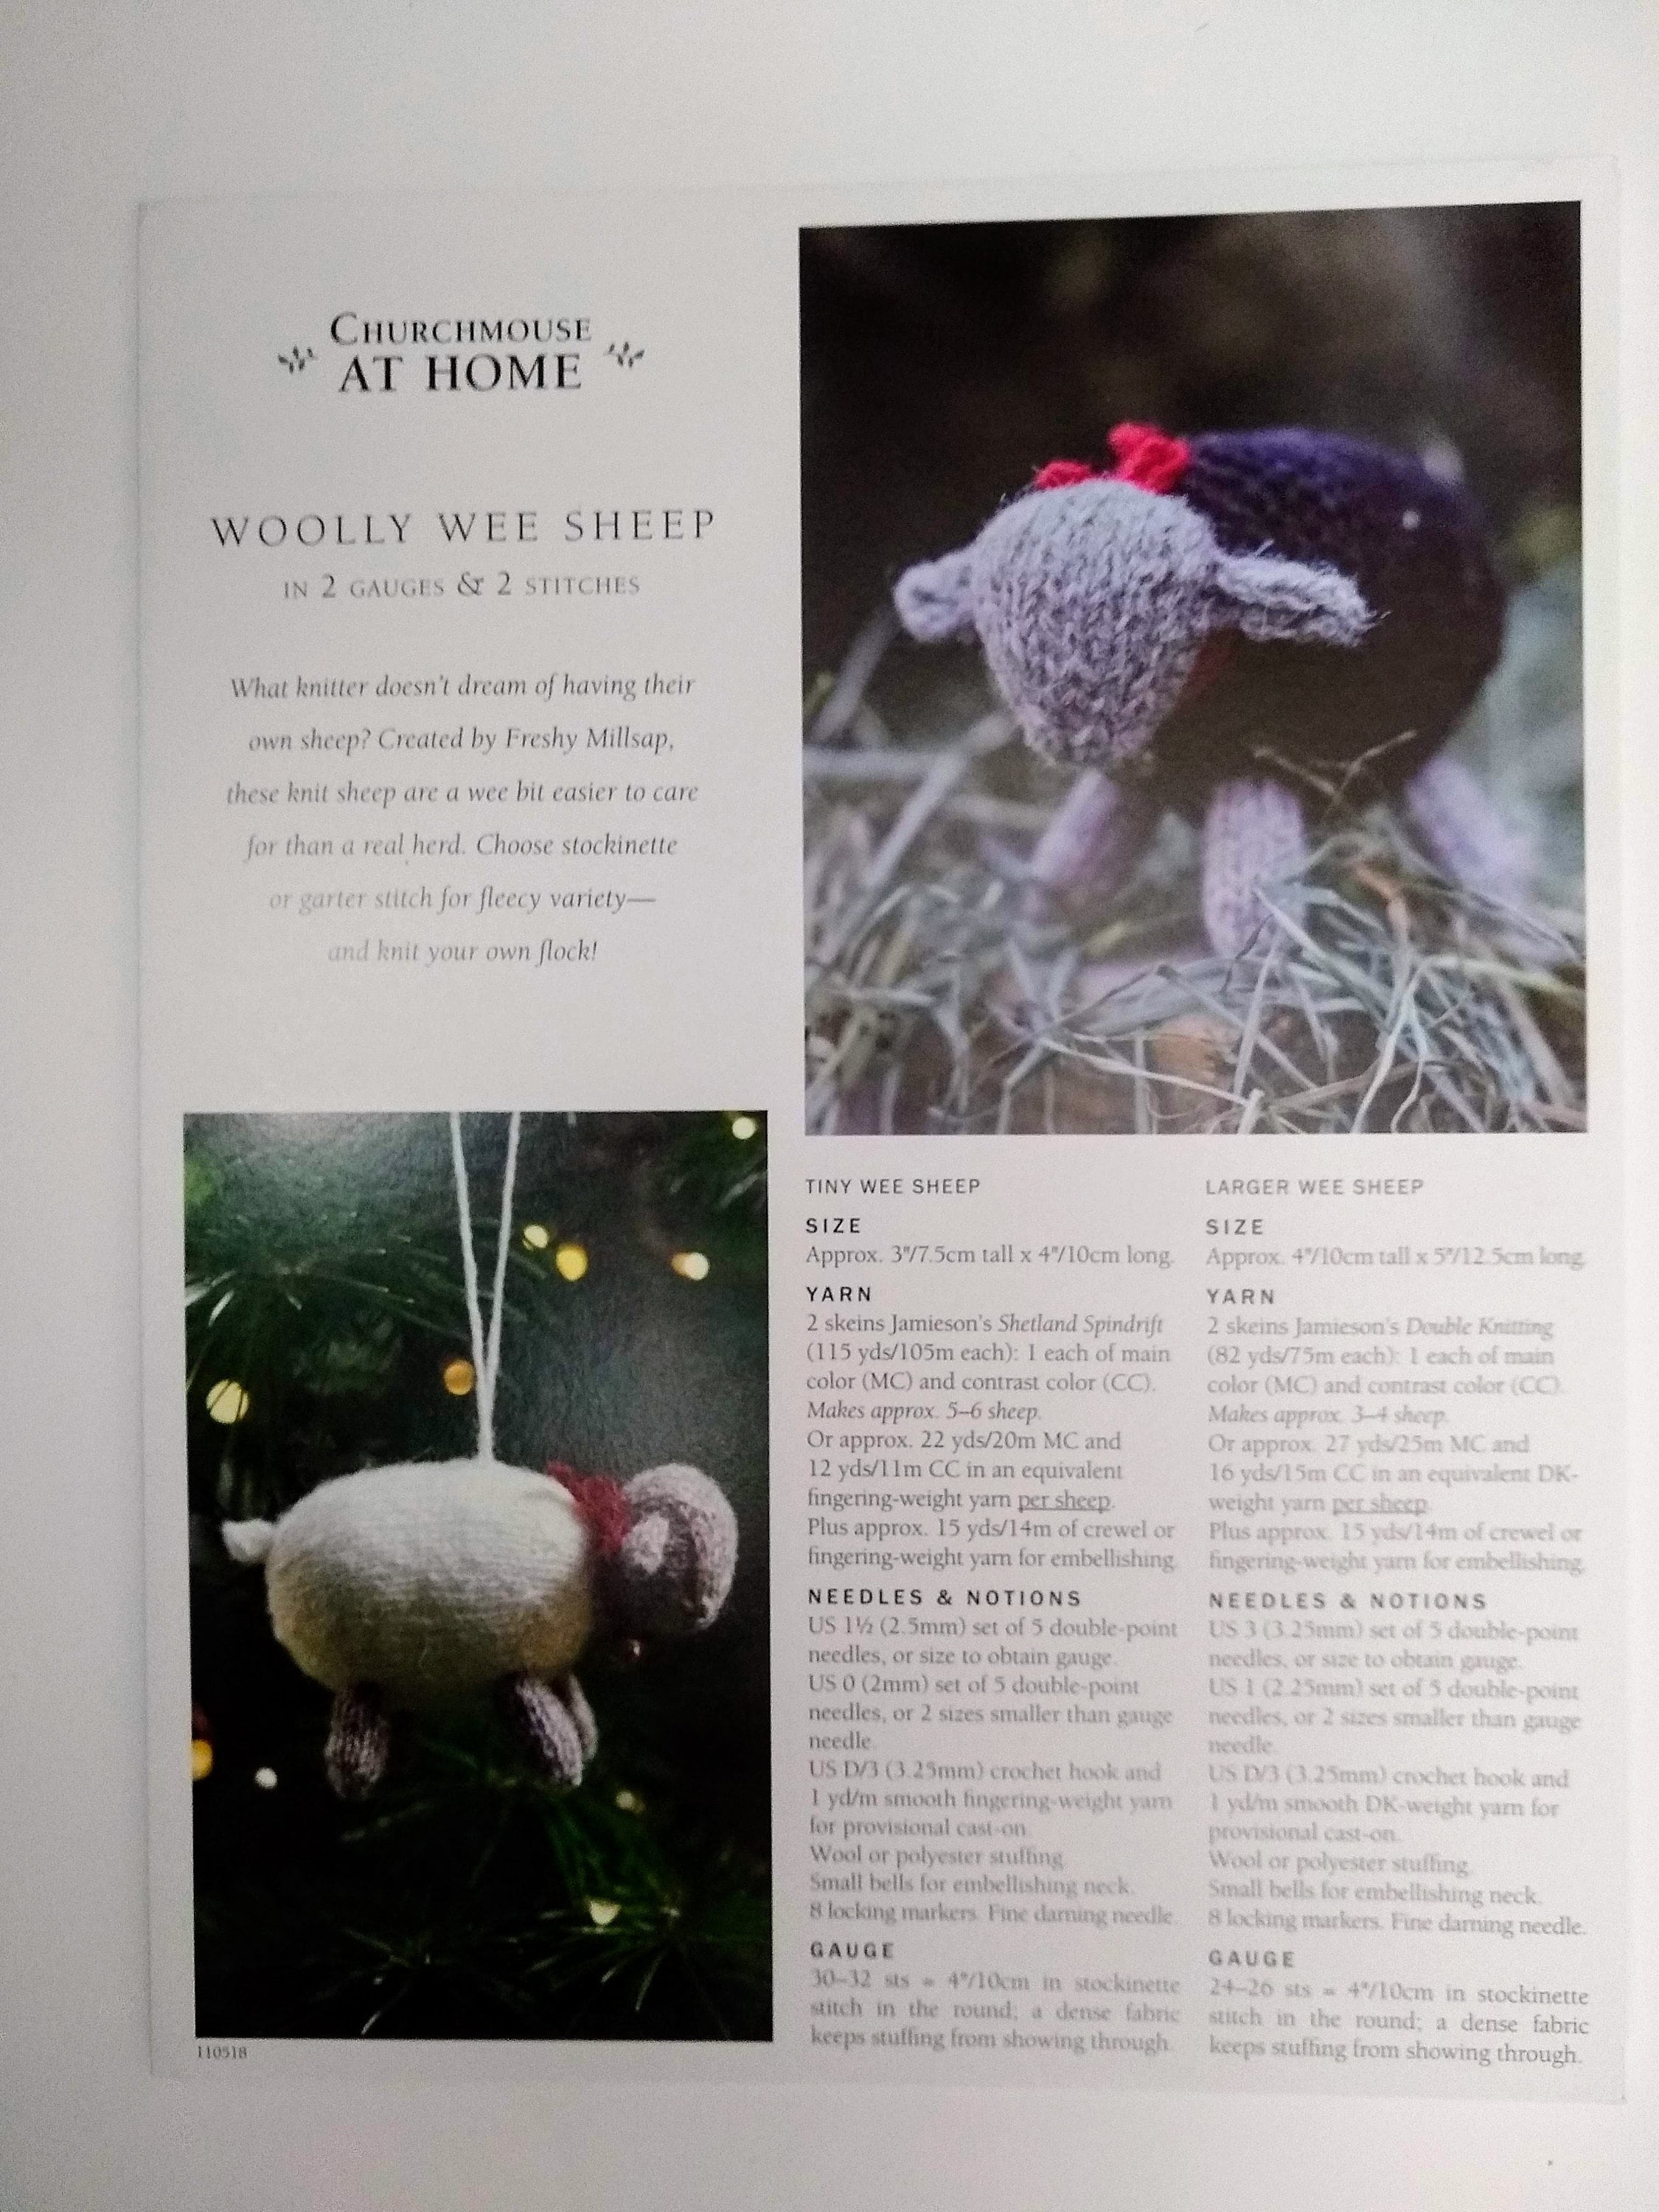 Woolly Wee Sheep, Churchmouse at Home, Knitting Patterns